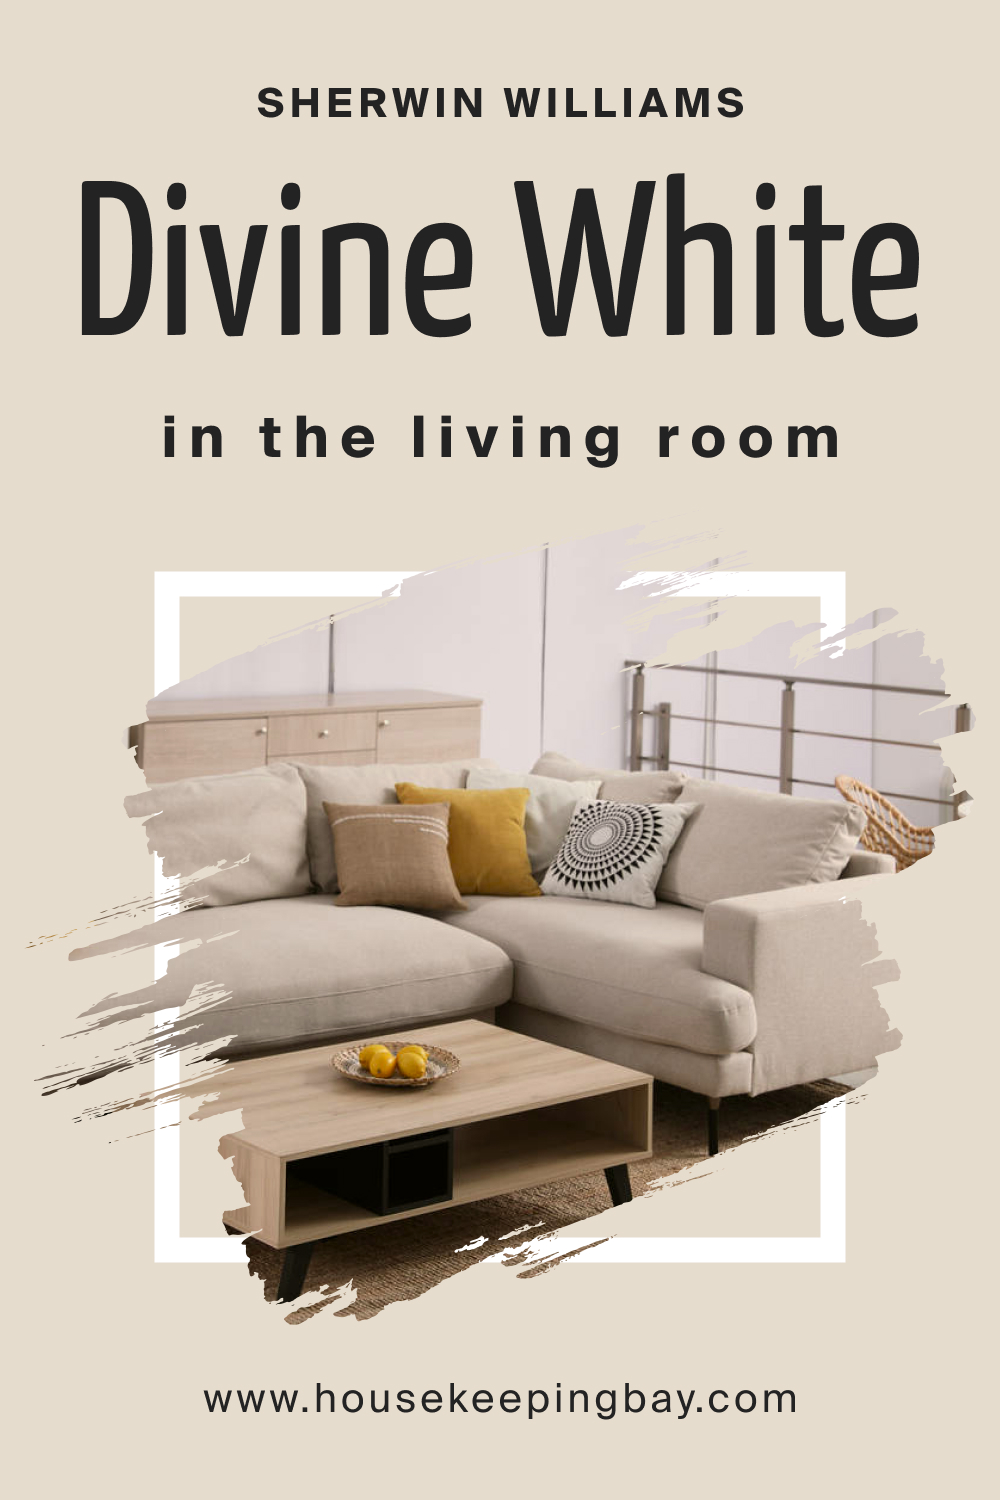 Sherwin Williams. SW Divine White In the Living Room